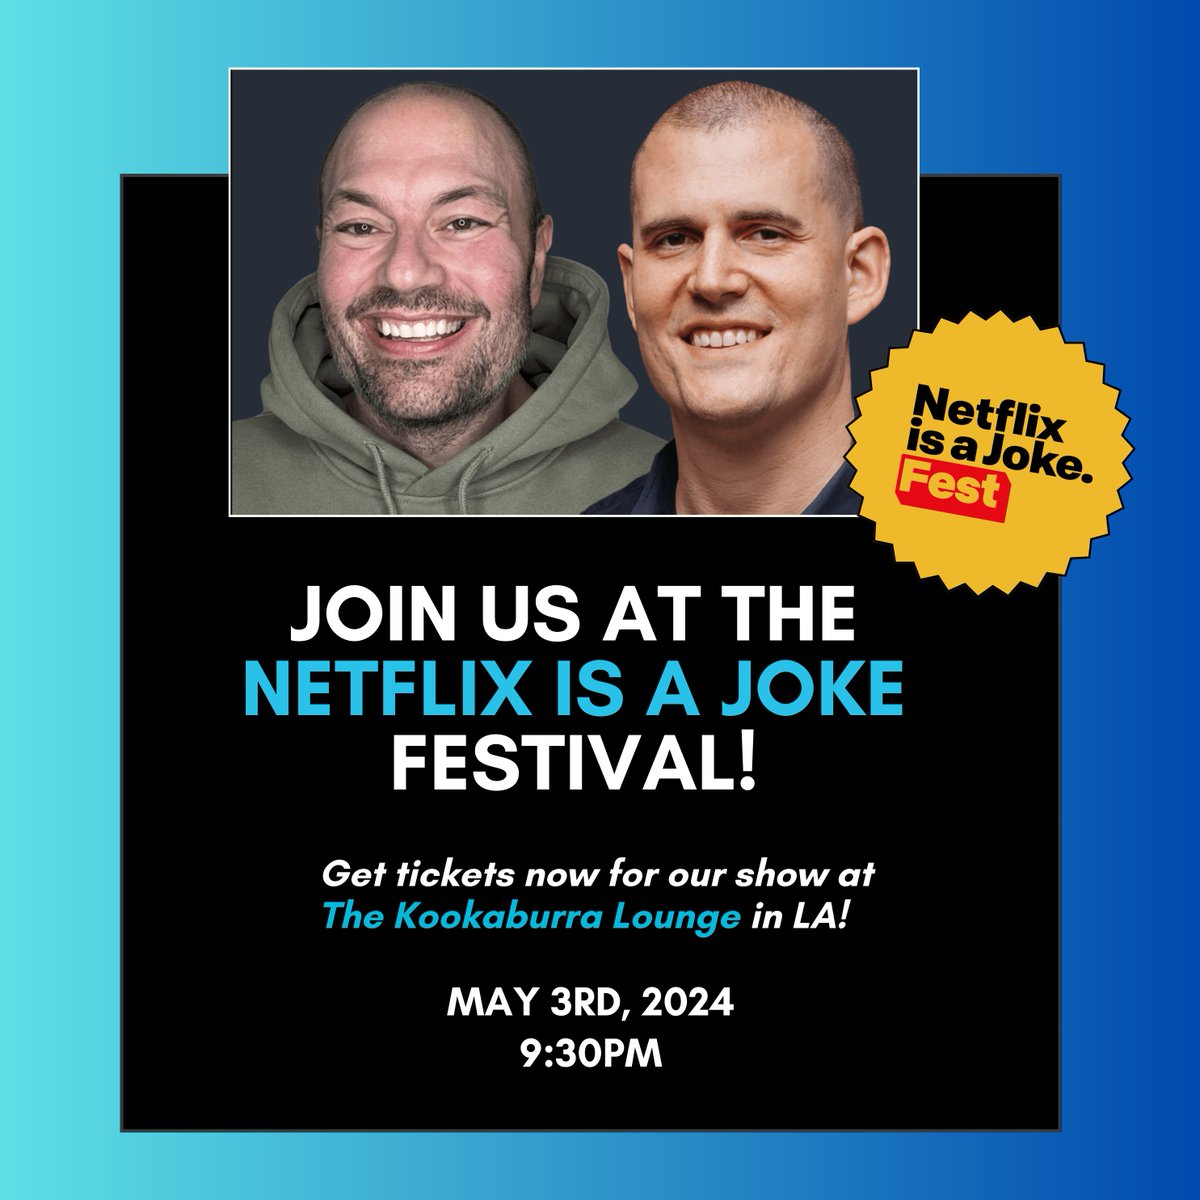 We're performing at the @NetflixIsAJoke Festival! Join us for our show on May 3rd at The Kookaburra Lounge in LA during the city's largest comedy festival. Tickets are selling like hotcakes, so grab them while they last! thekookaburralounge.com/events/watchwh… @RonnieKaram @BenMandelker